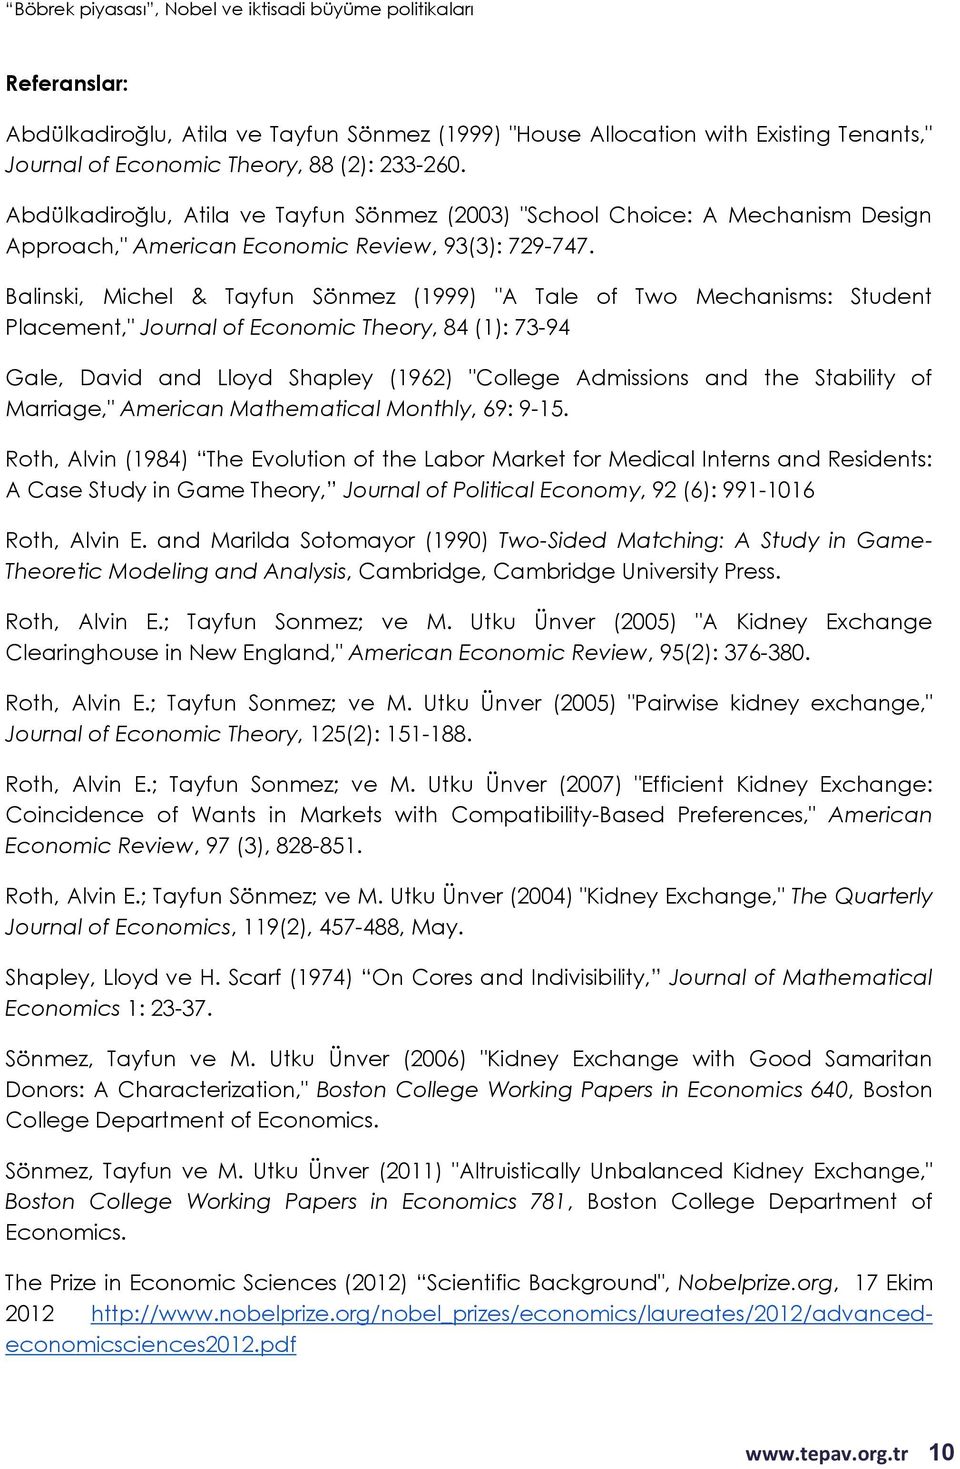 Balinski, Michel & Tayfun Sönmez (1999) "A Tale of Two Mechanisms: Student Placement," Journal of Economic Theory, 84 (1): 73-94 Gale, David and Lloyd Shapley (1962) "College Admissions and the